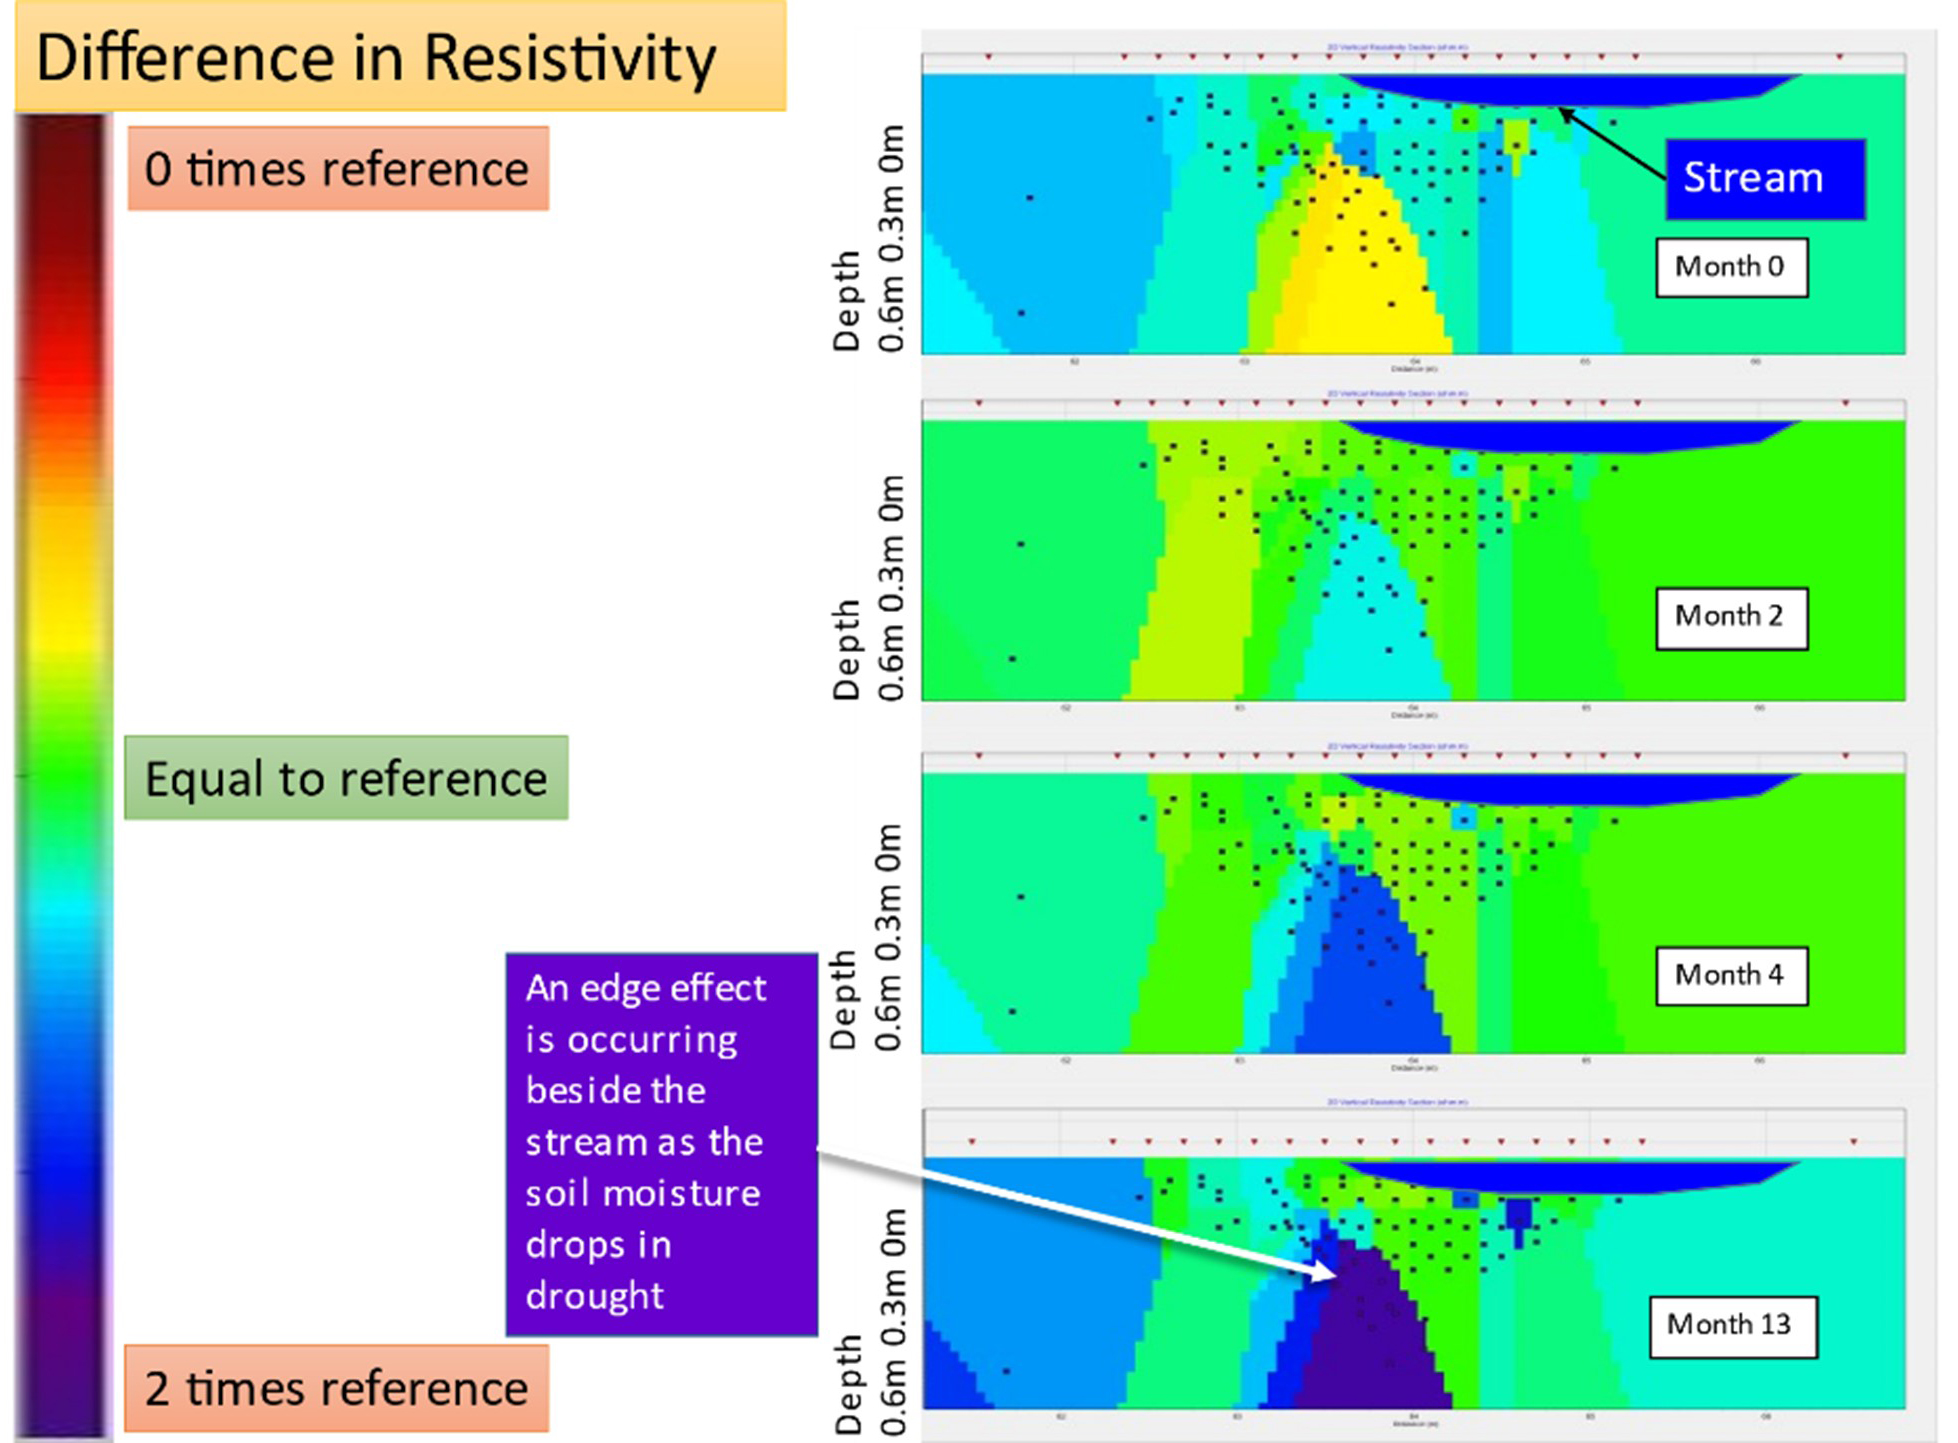 Graph showing difference in resistivity